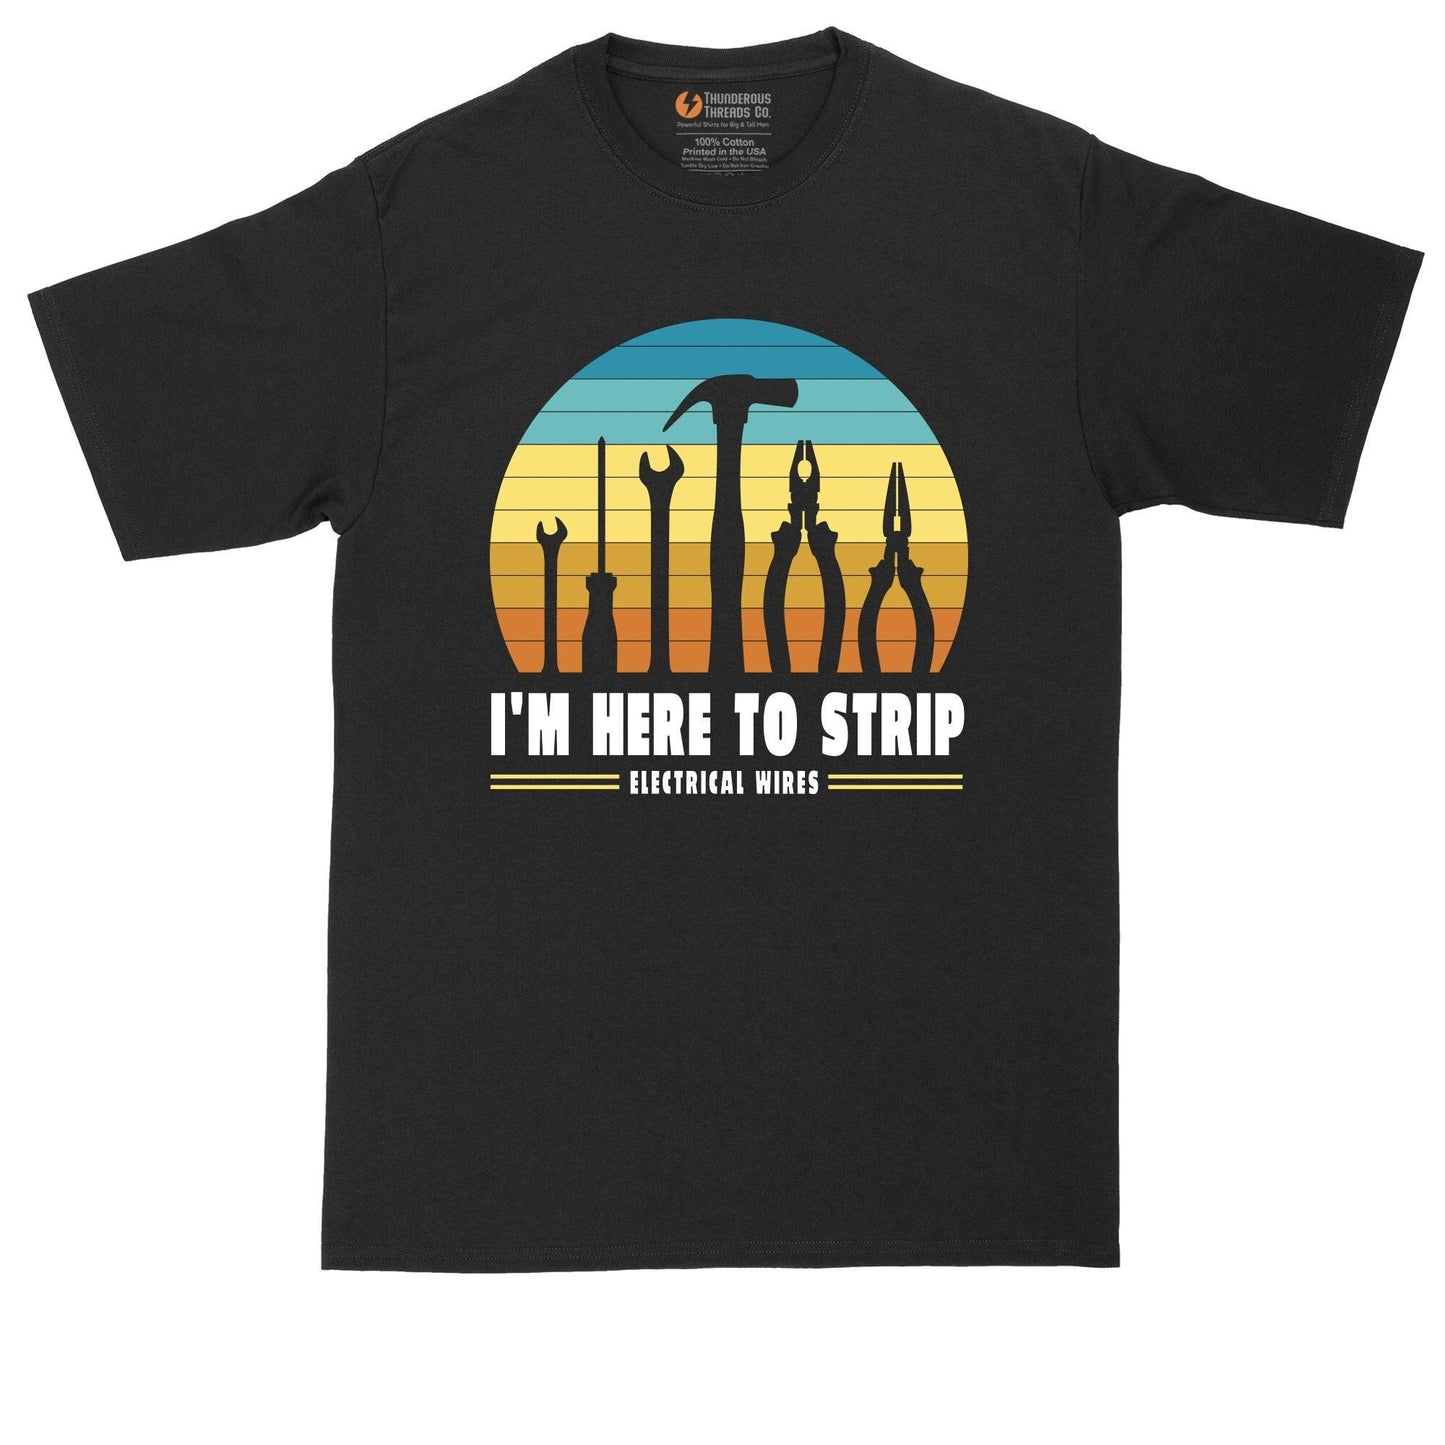 I'm Here to Strip - Electrical Wires | Mens Big and Tall T-Shirt | Funny Mens T-Shirt | Handyman Shirt | Electrician |Gift for Dad